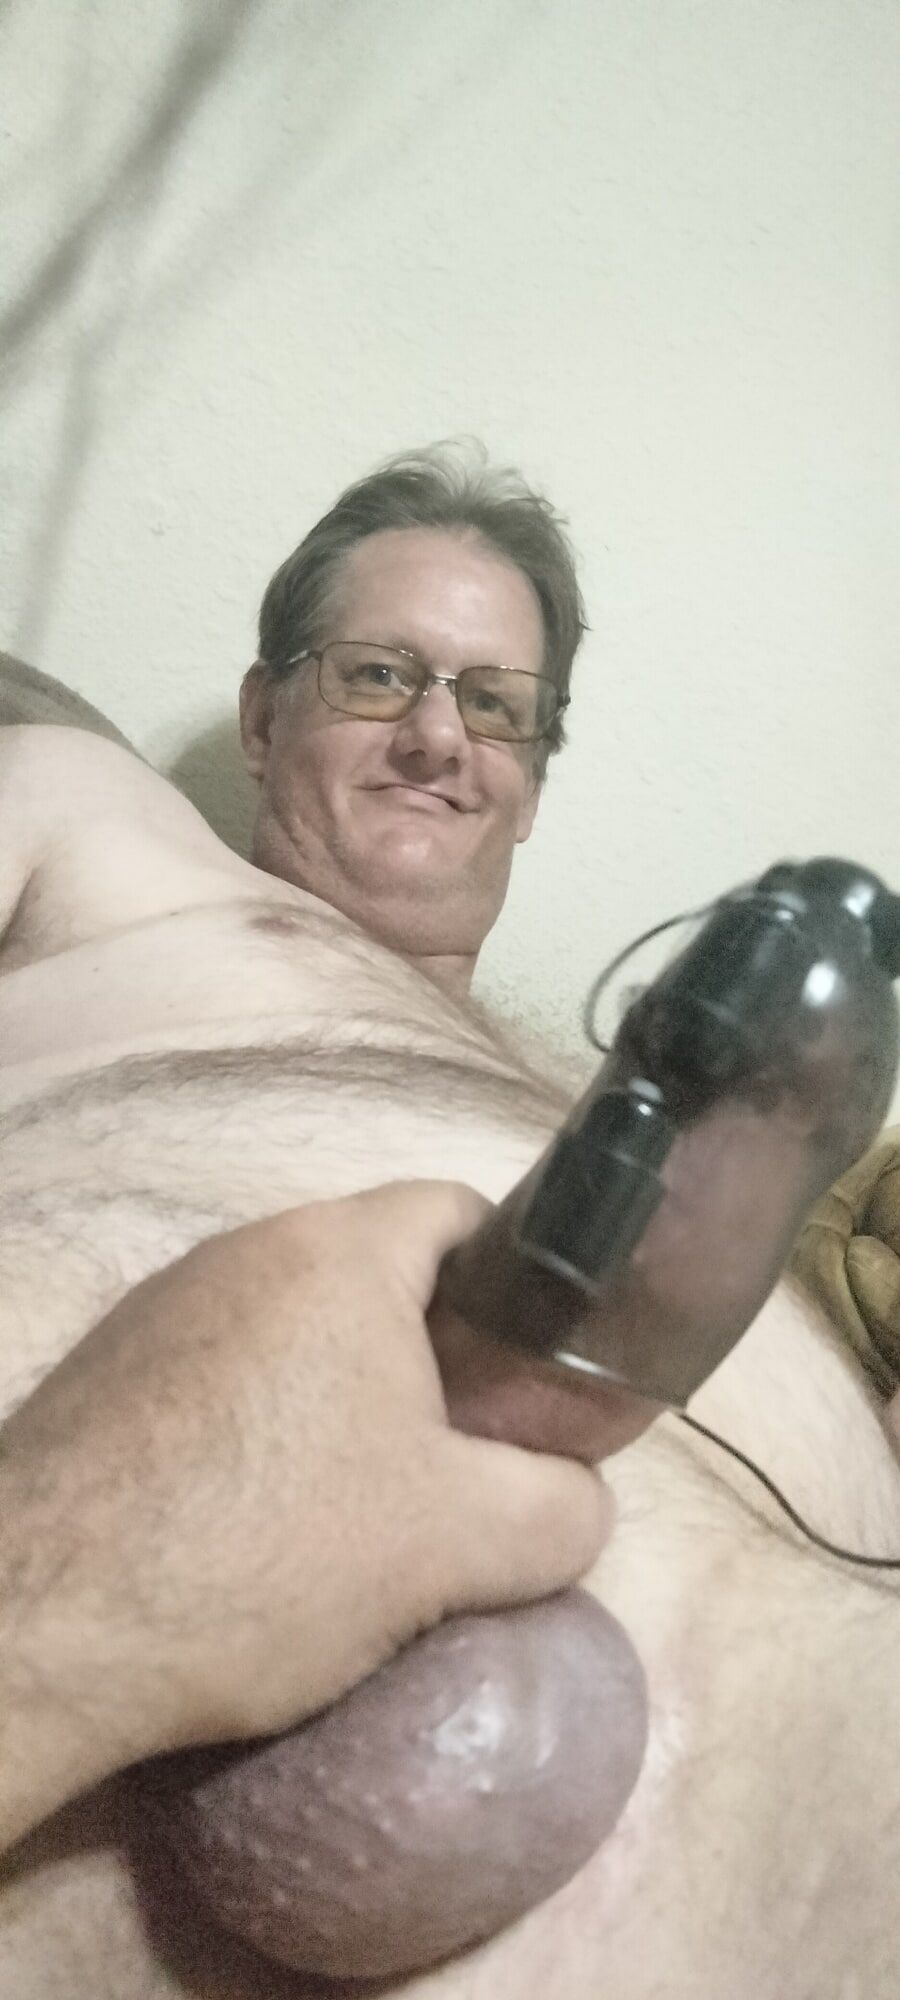 My ass has toys and my cock 